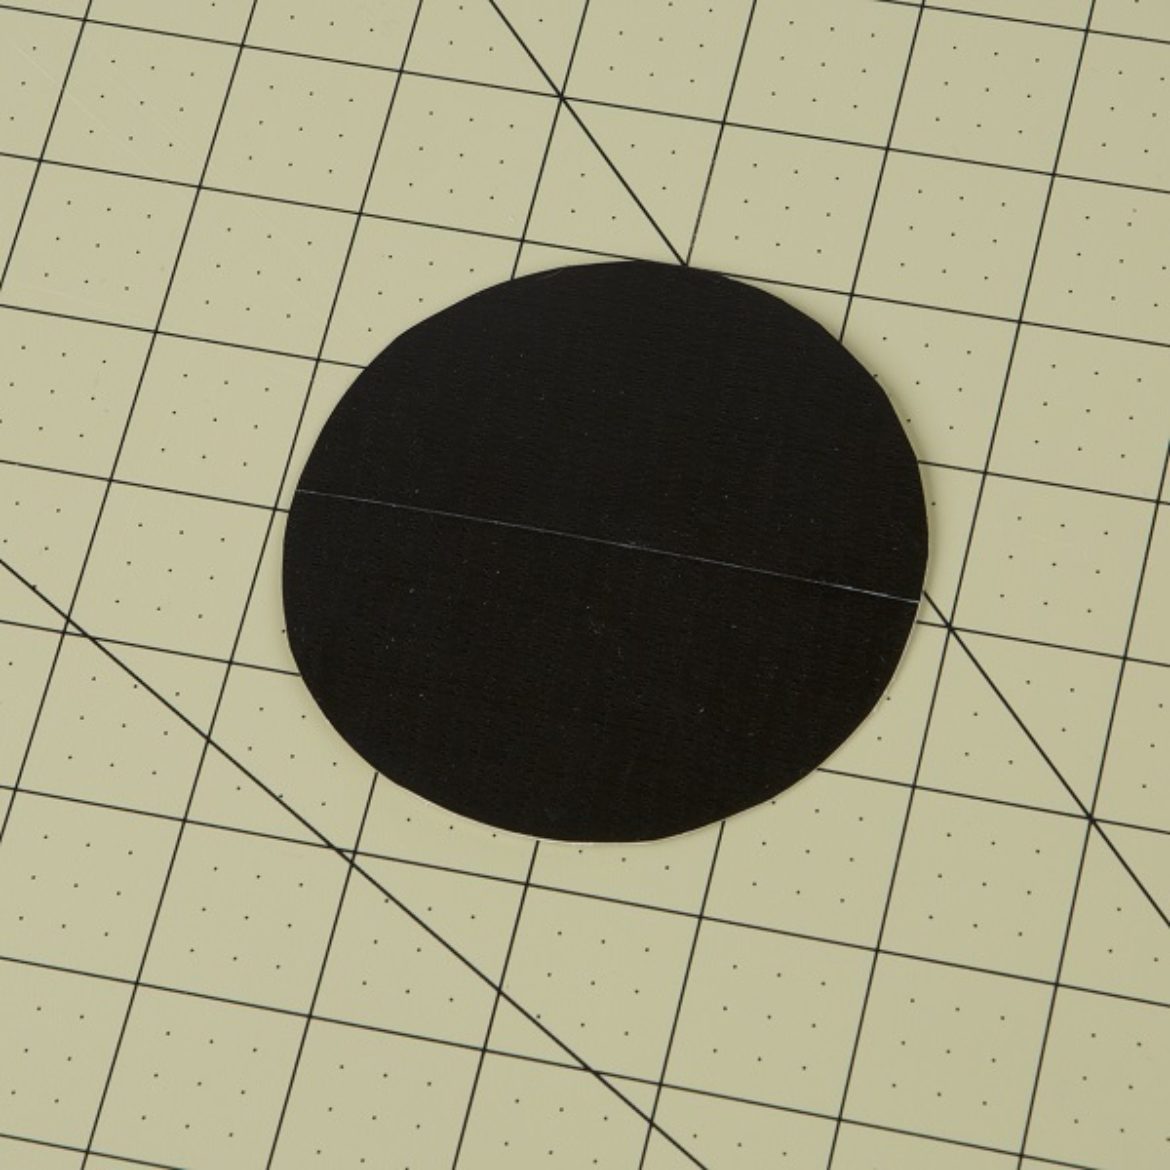 circle from the previous step covered in black Duck Tape